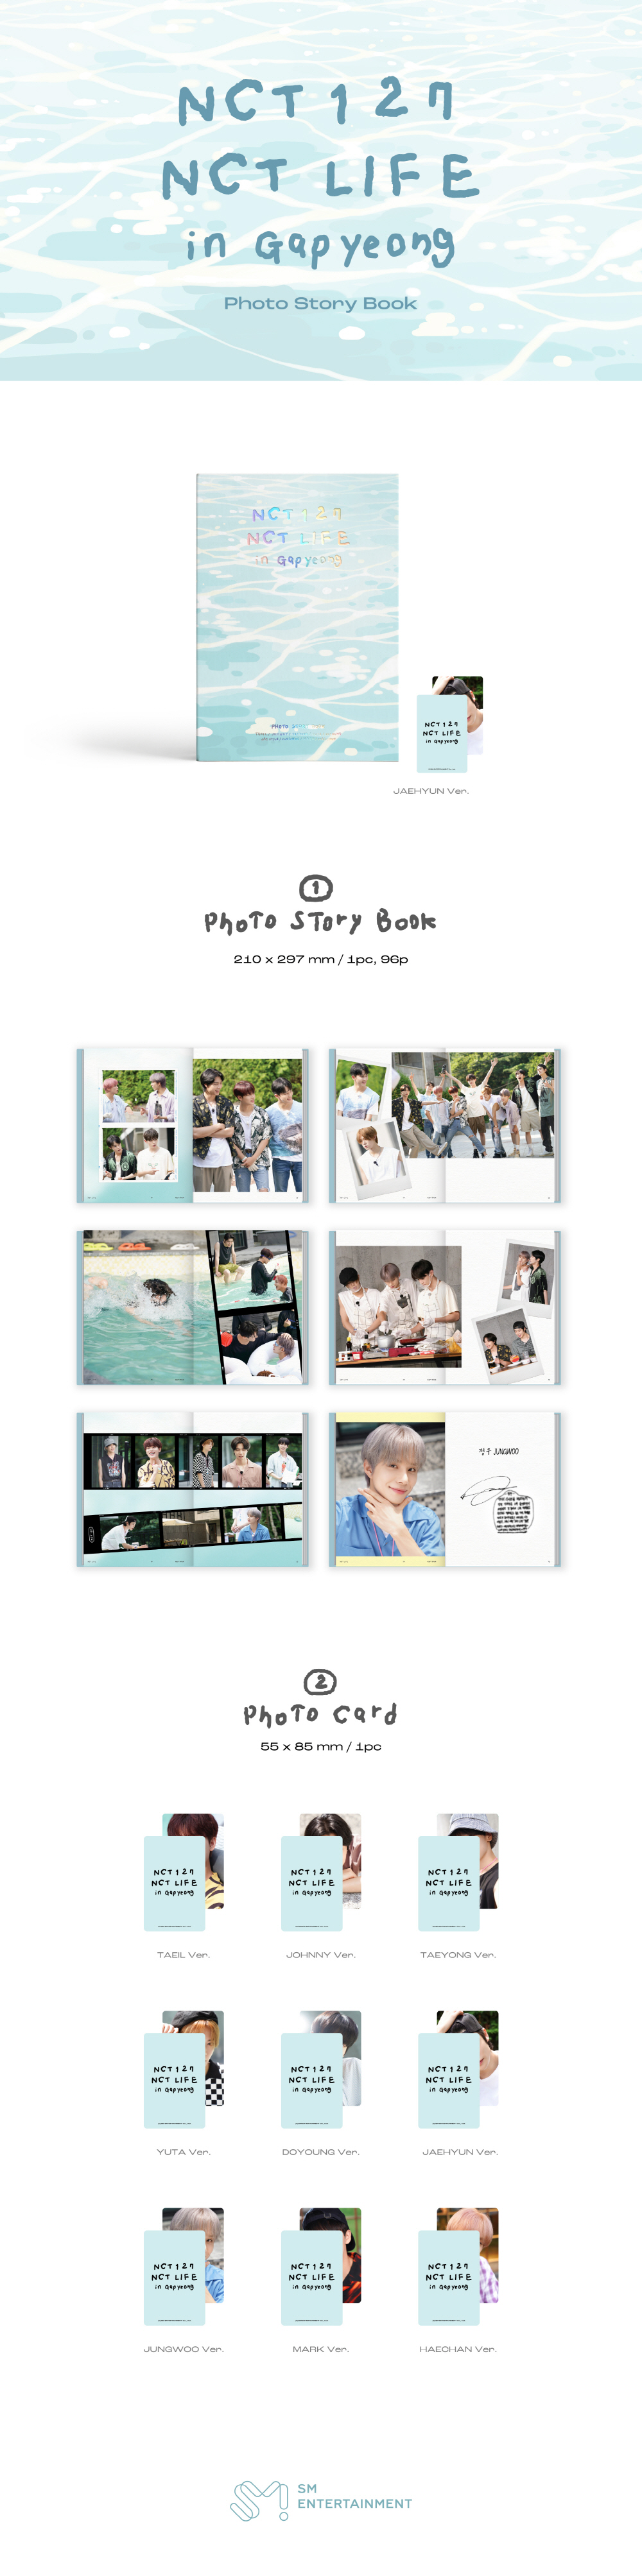 NCT 127 [NCT LIFE in Gapyeong] PHOTO STORY BOOK (TAEYONG) nct127 photobook nct127goods NCT127Gapyeong Gapyeong PHOTOSTORYBOOK NCT127photobook NCT127photostorybook